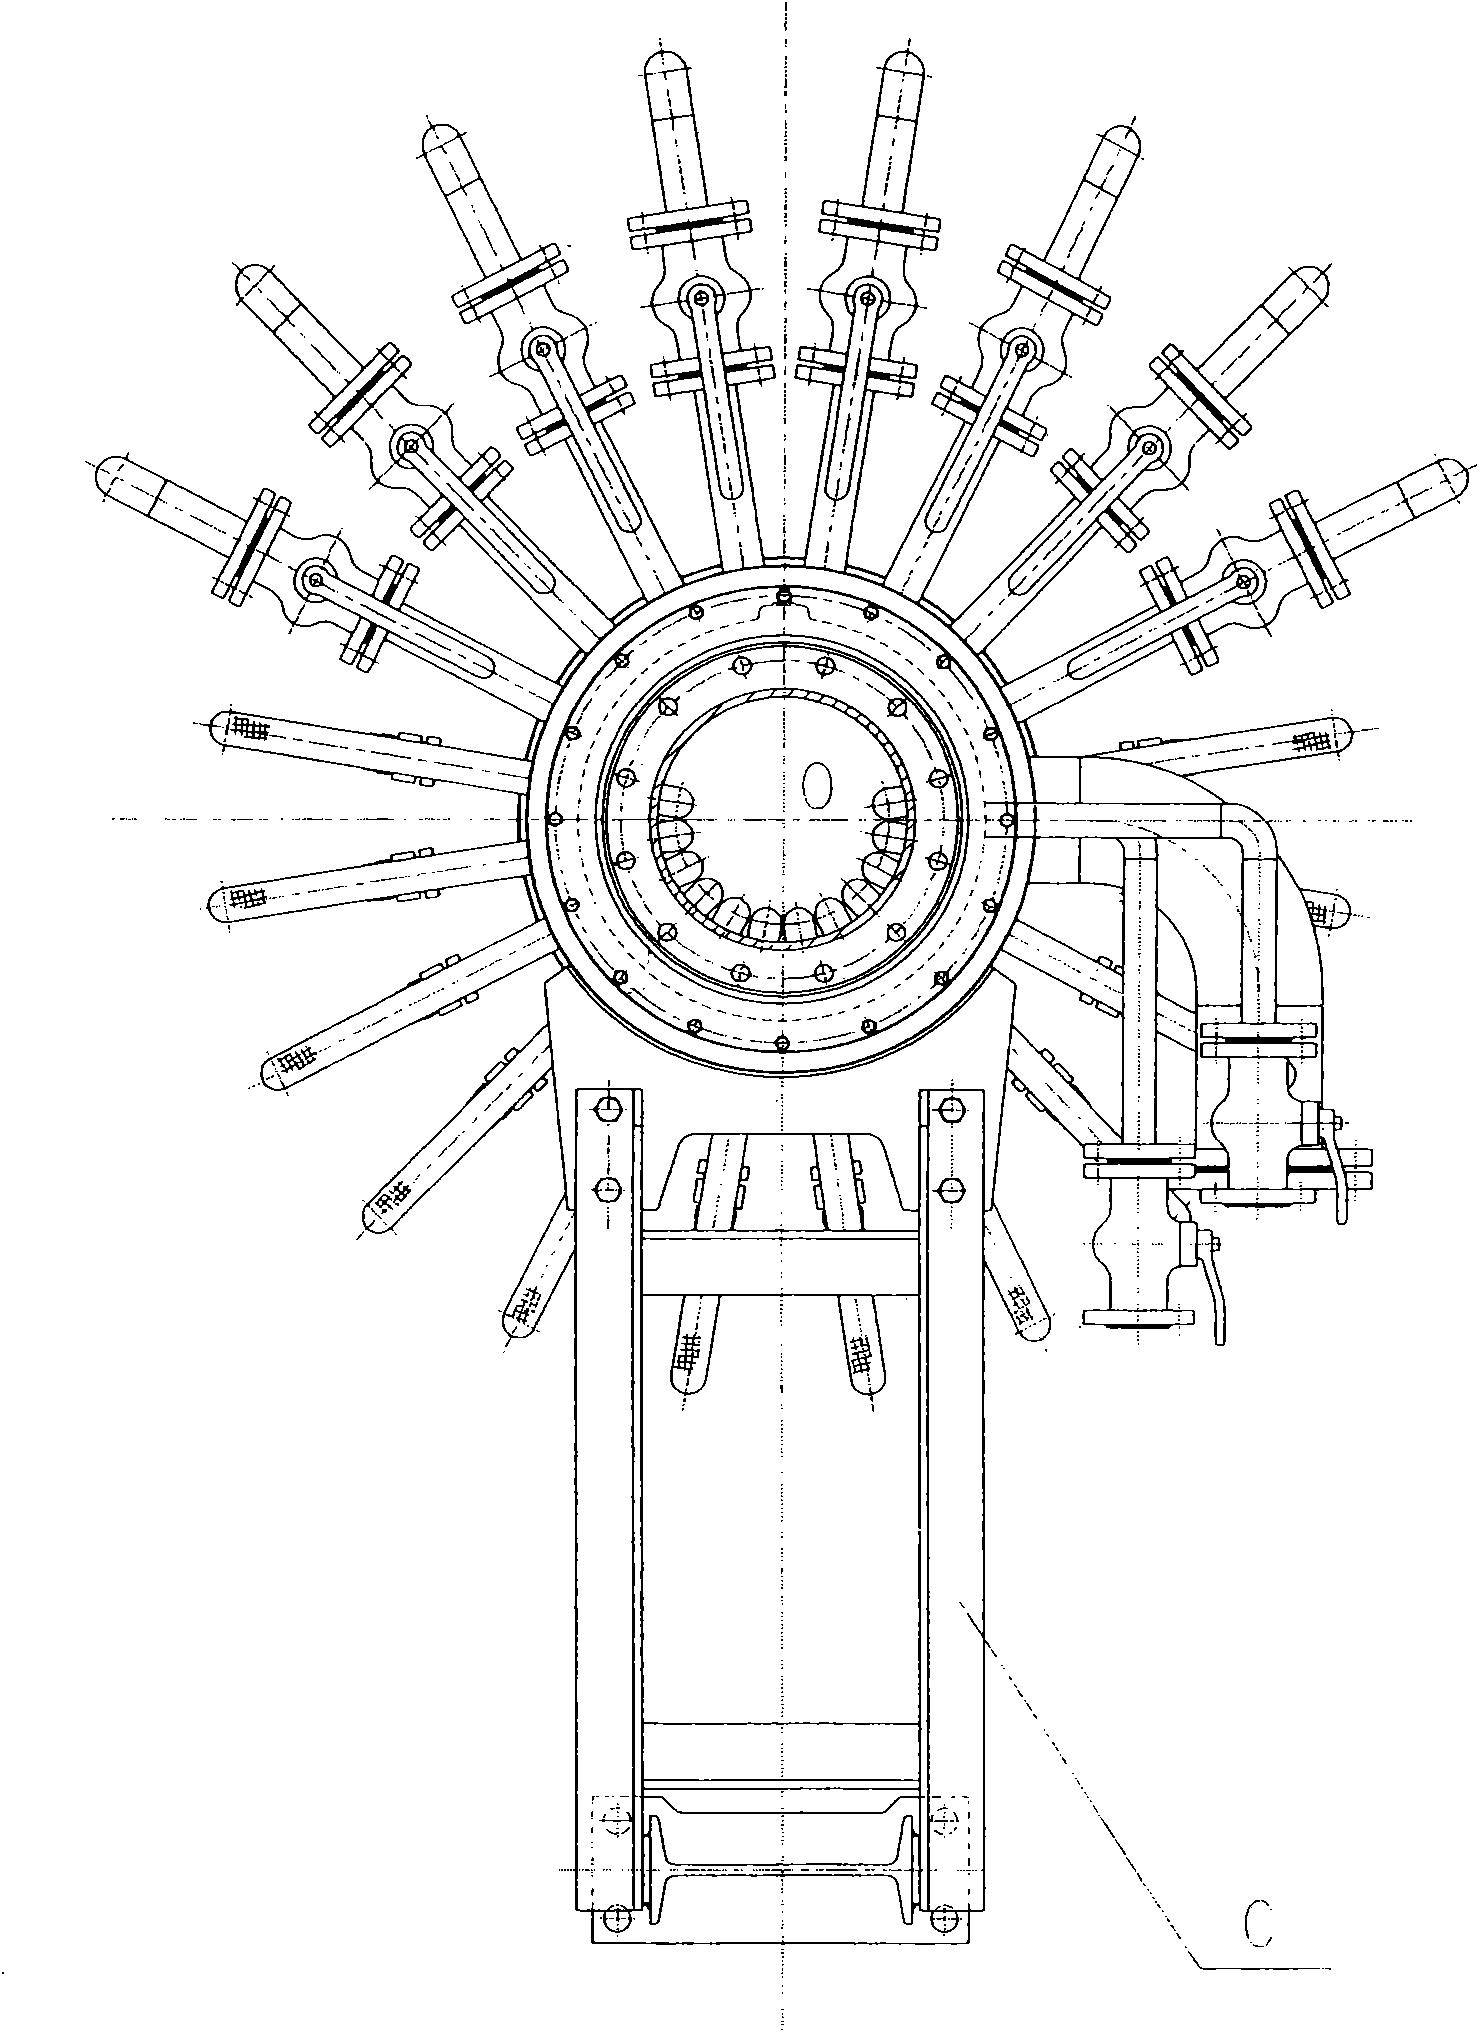 Anti-rotation device of rotary joint